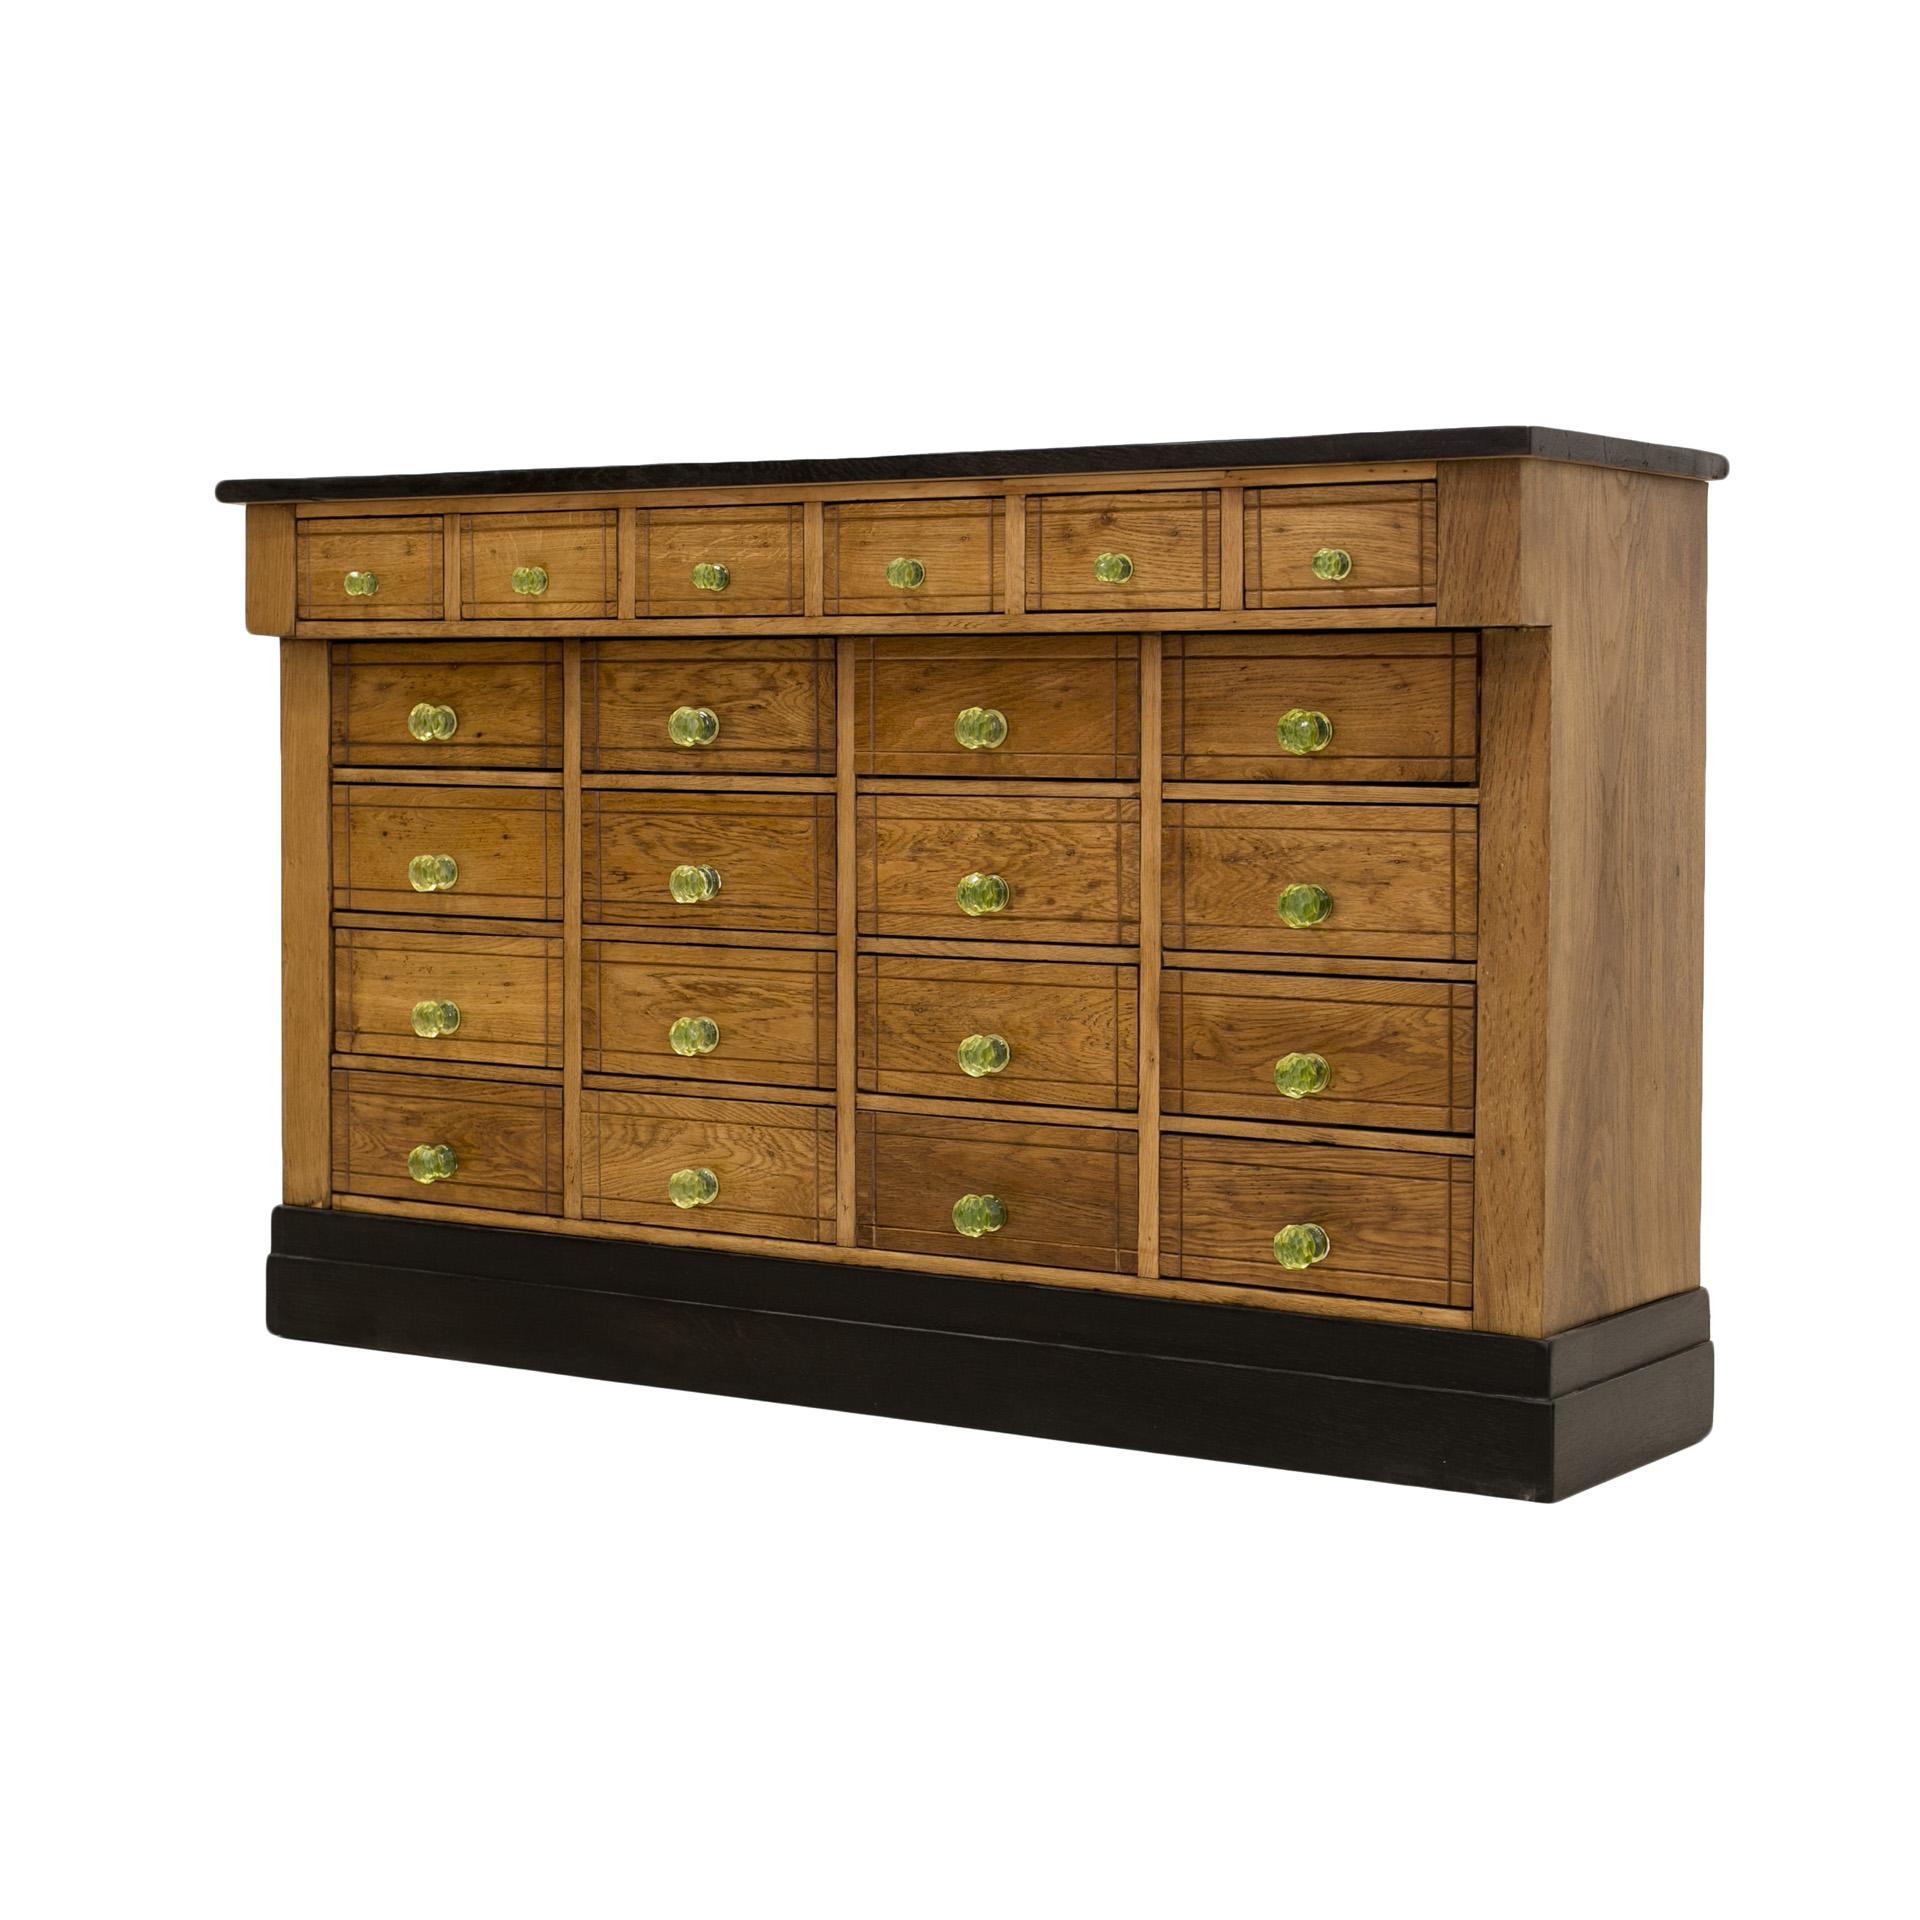 Polish Apothecary Chest of Drawers, Solid Oak, Late 19th Century